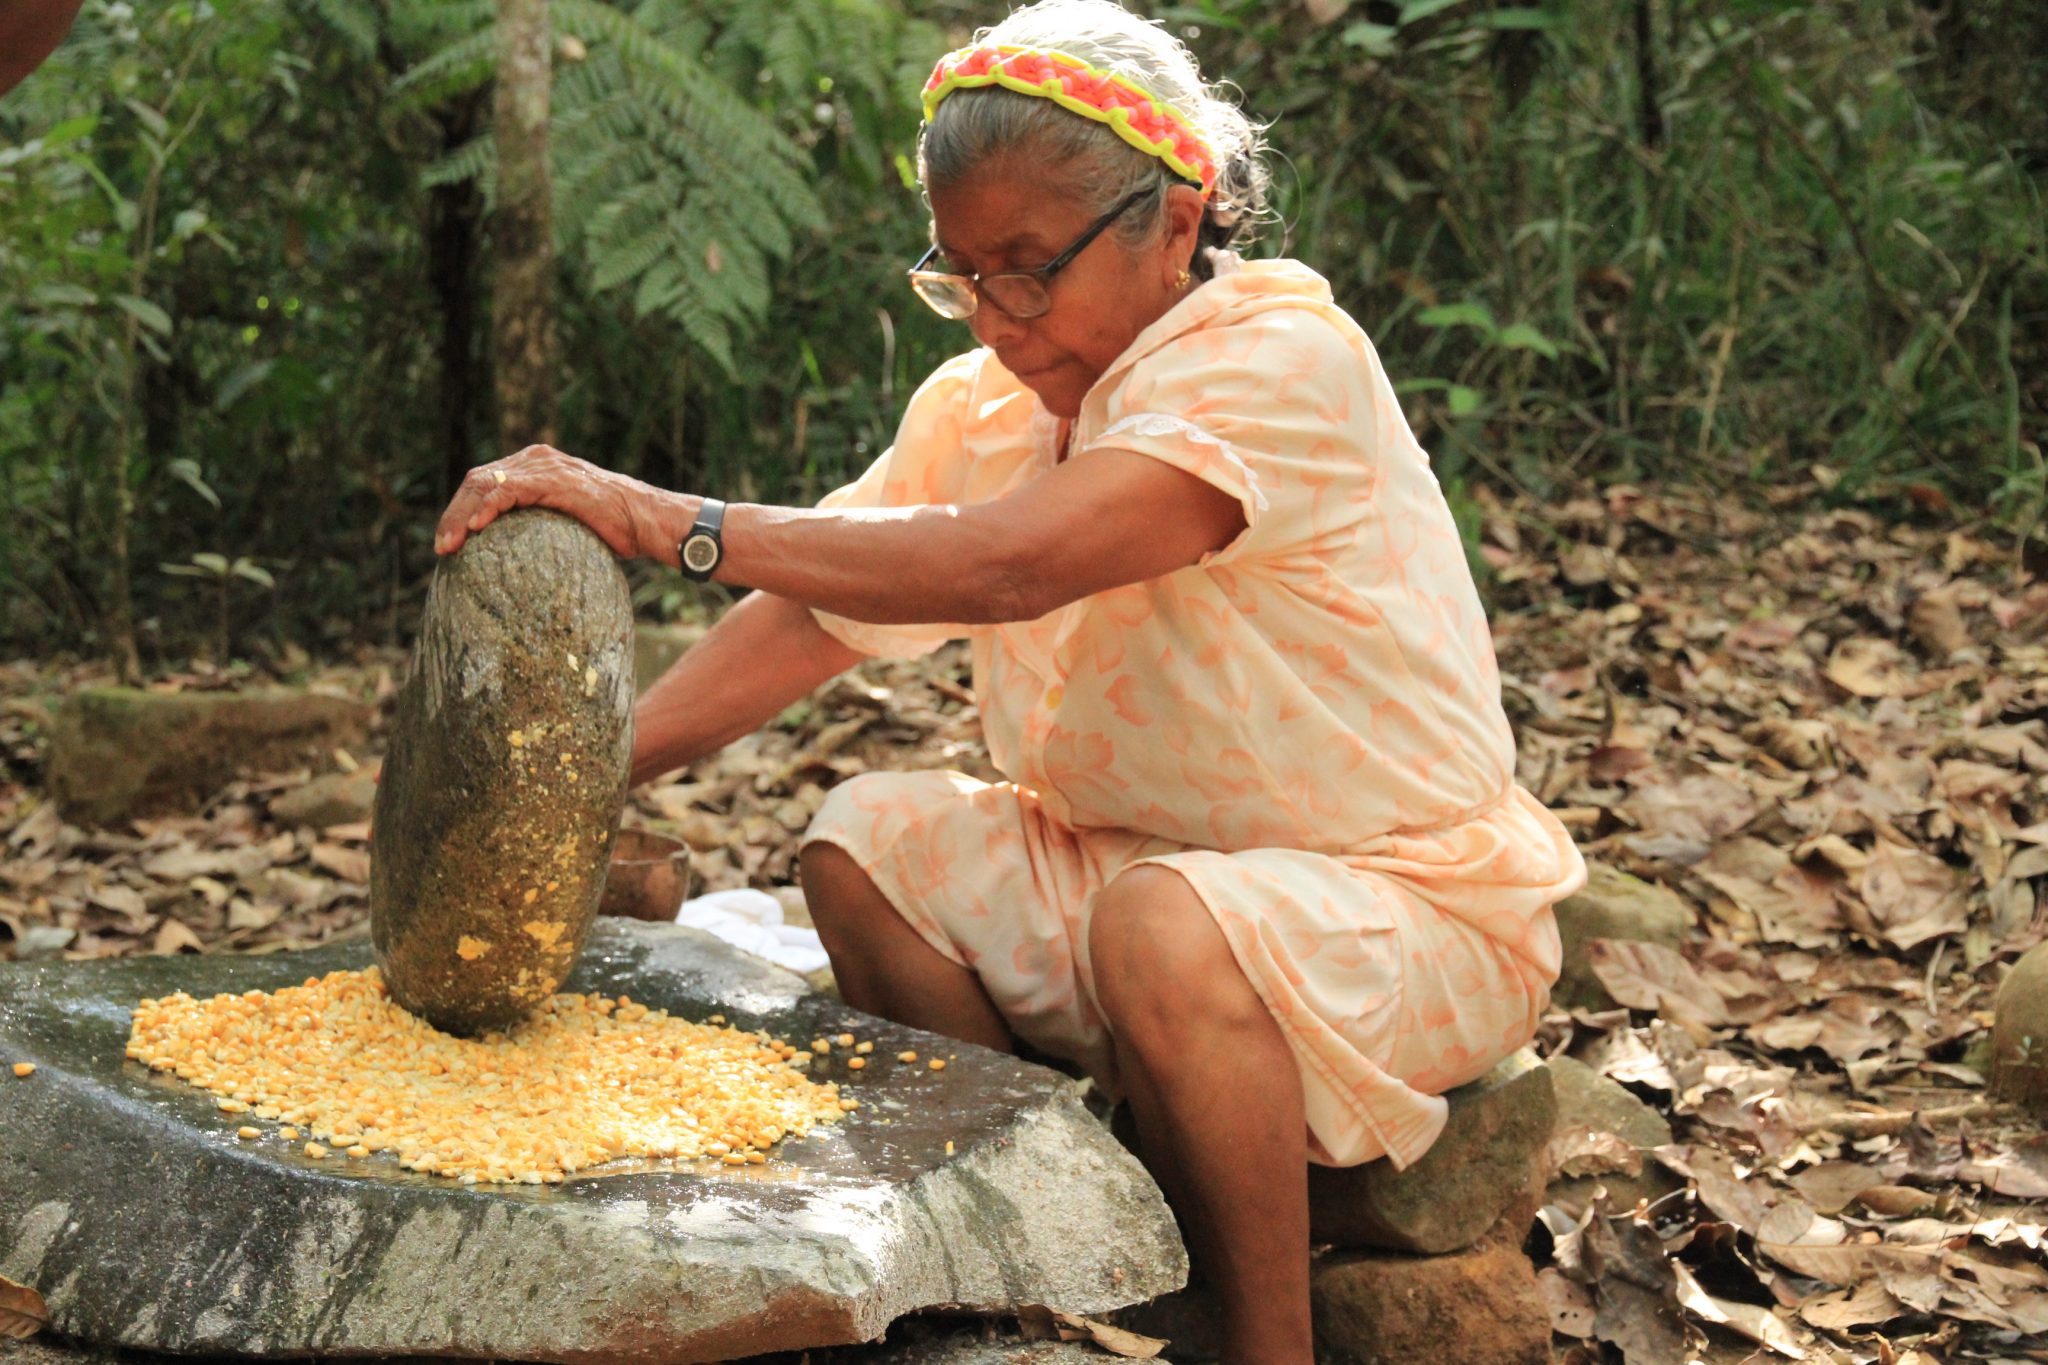 A photo of a Bribri elder grinding corn in the traditional fashion.